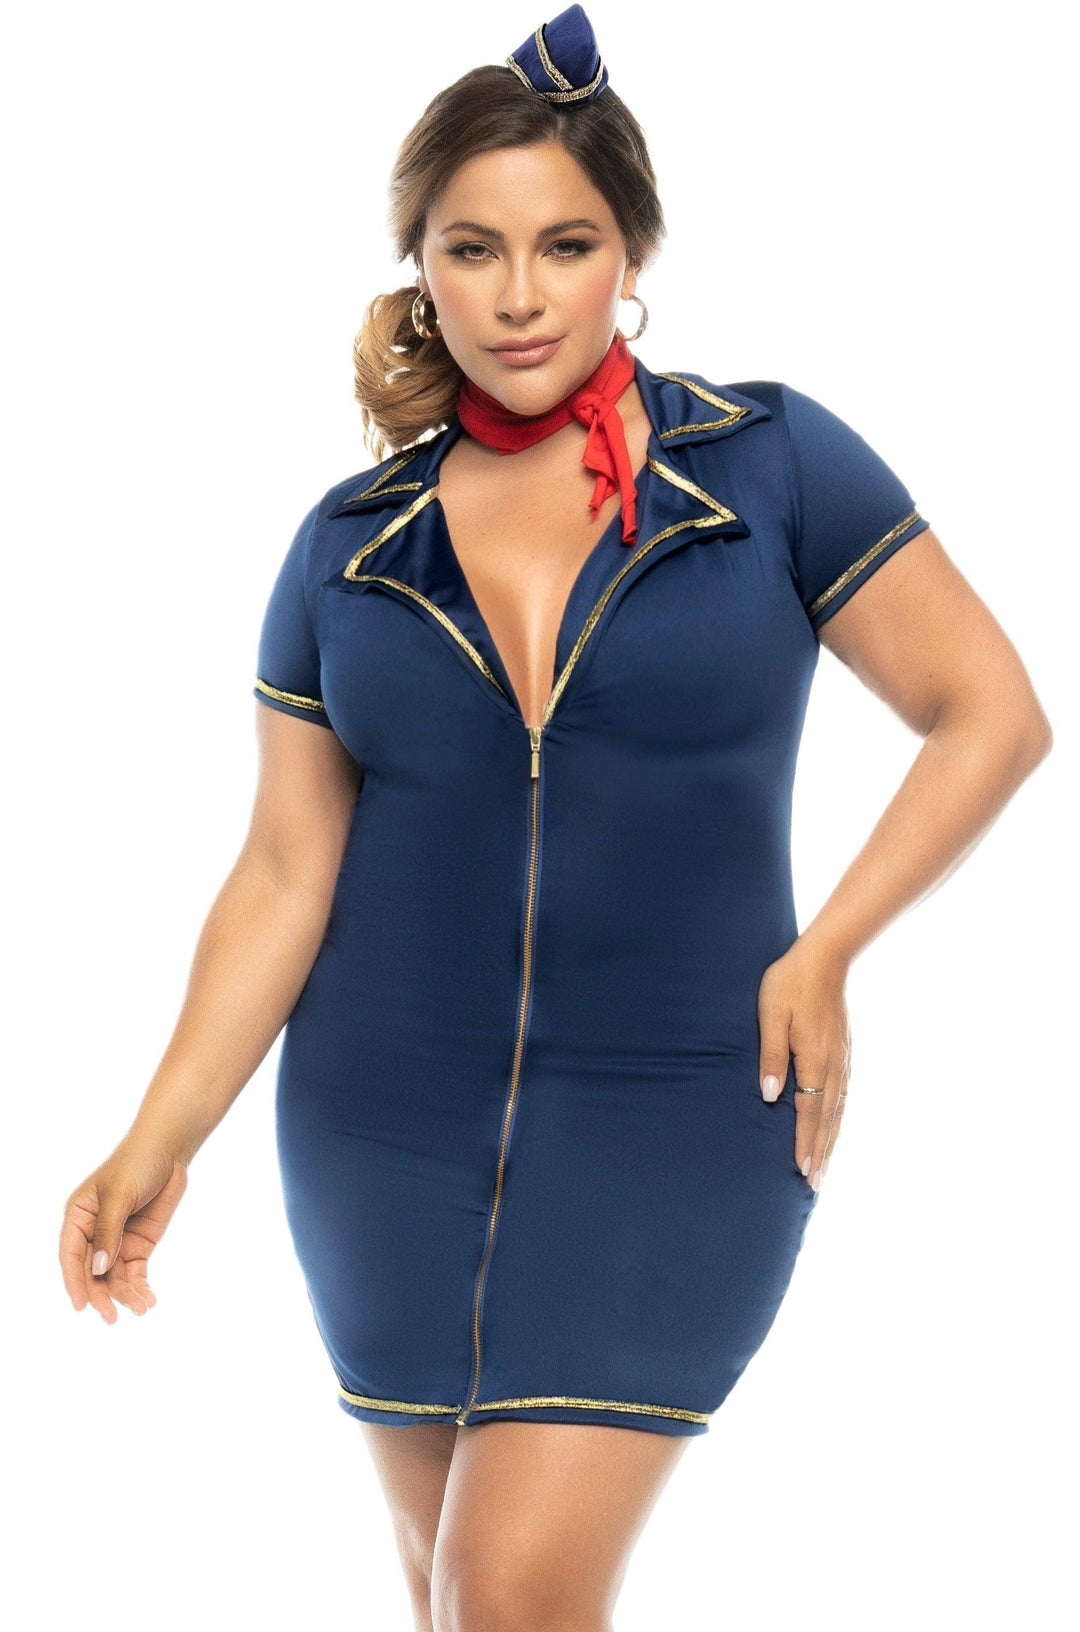 New Heights Plane Costume | Plus Size - SEXYSHOES.COM